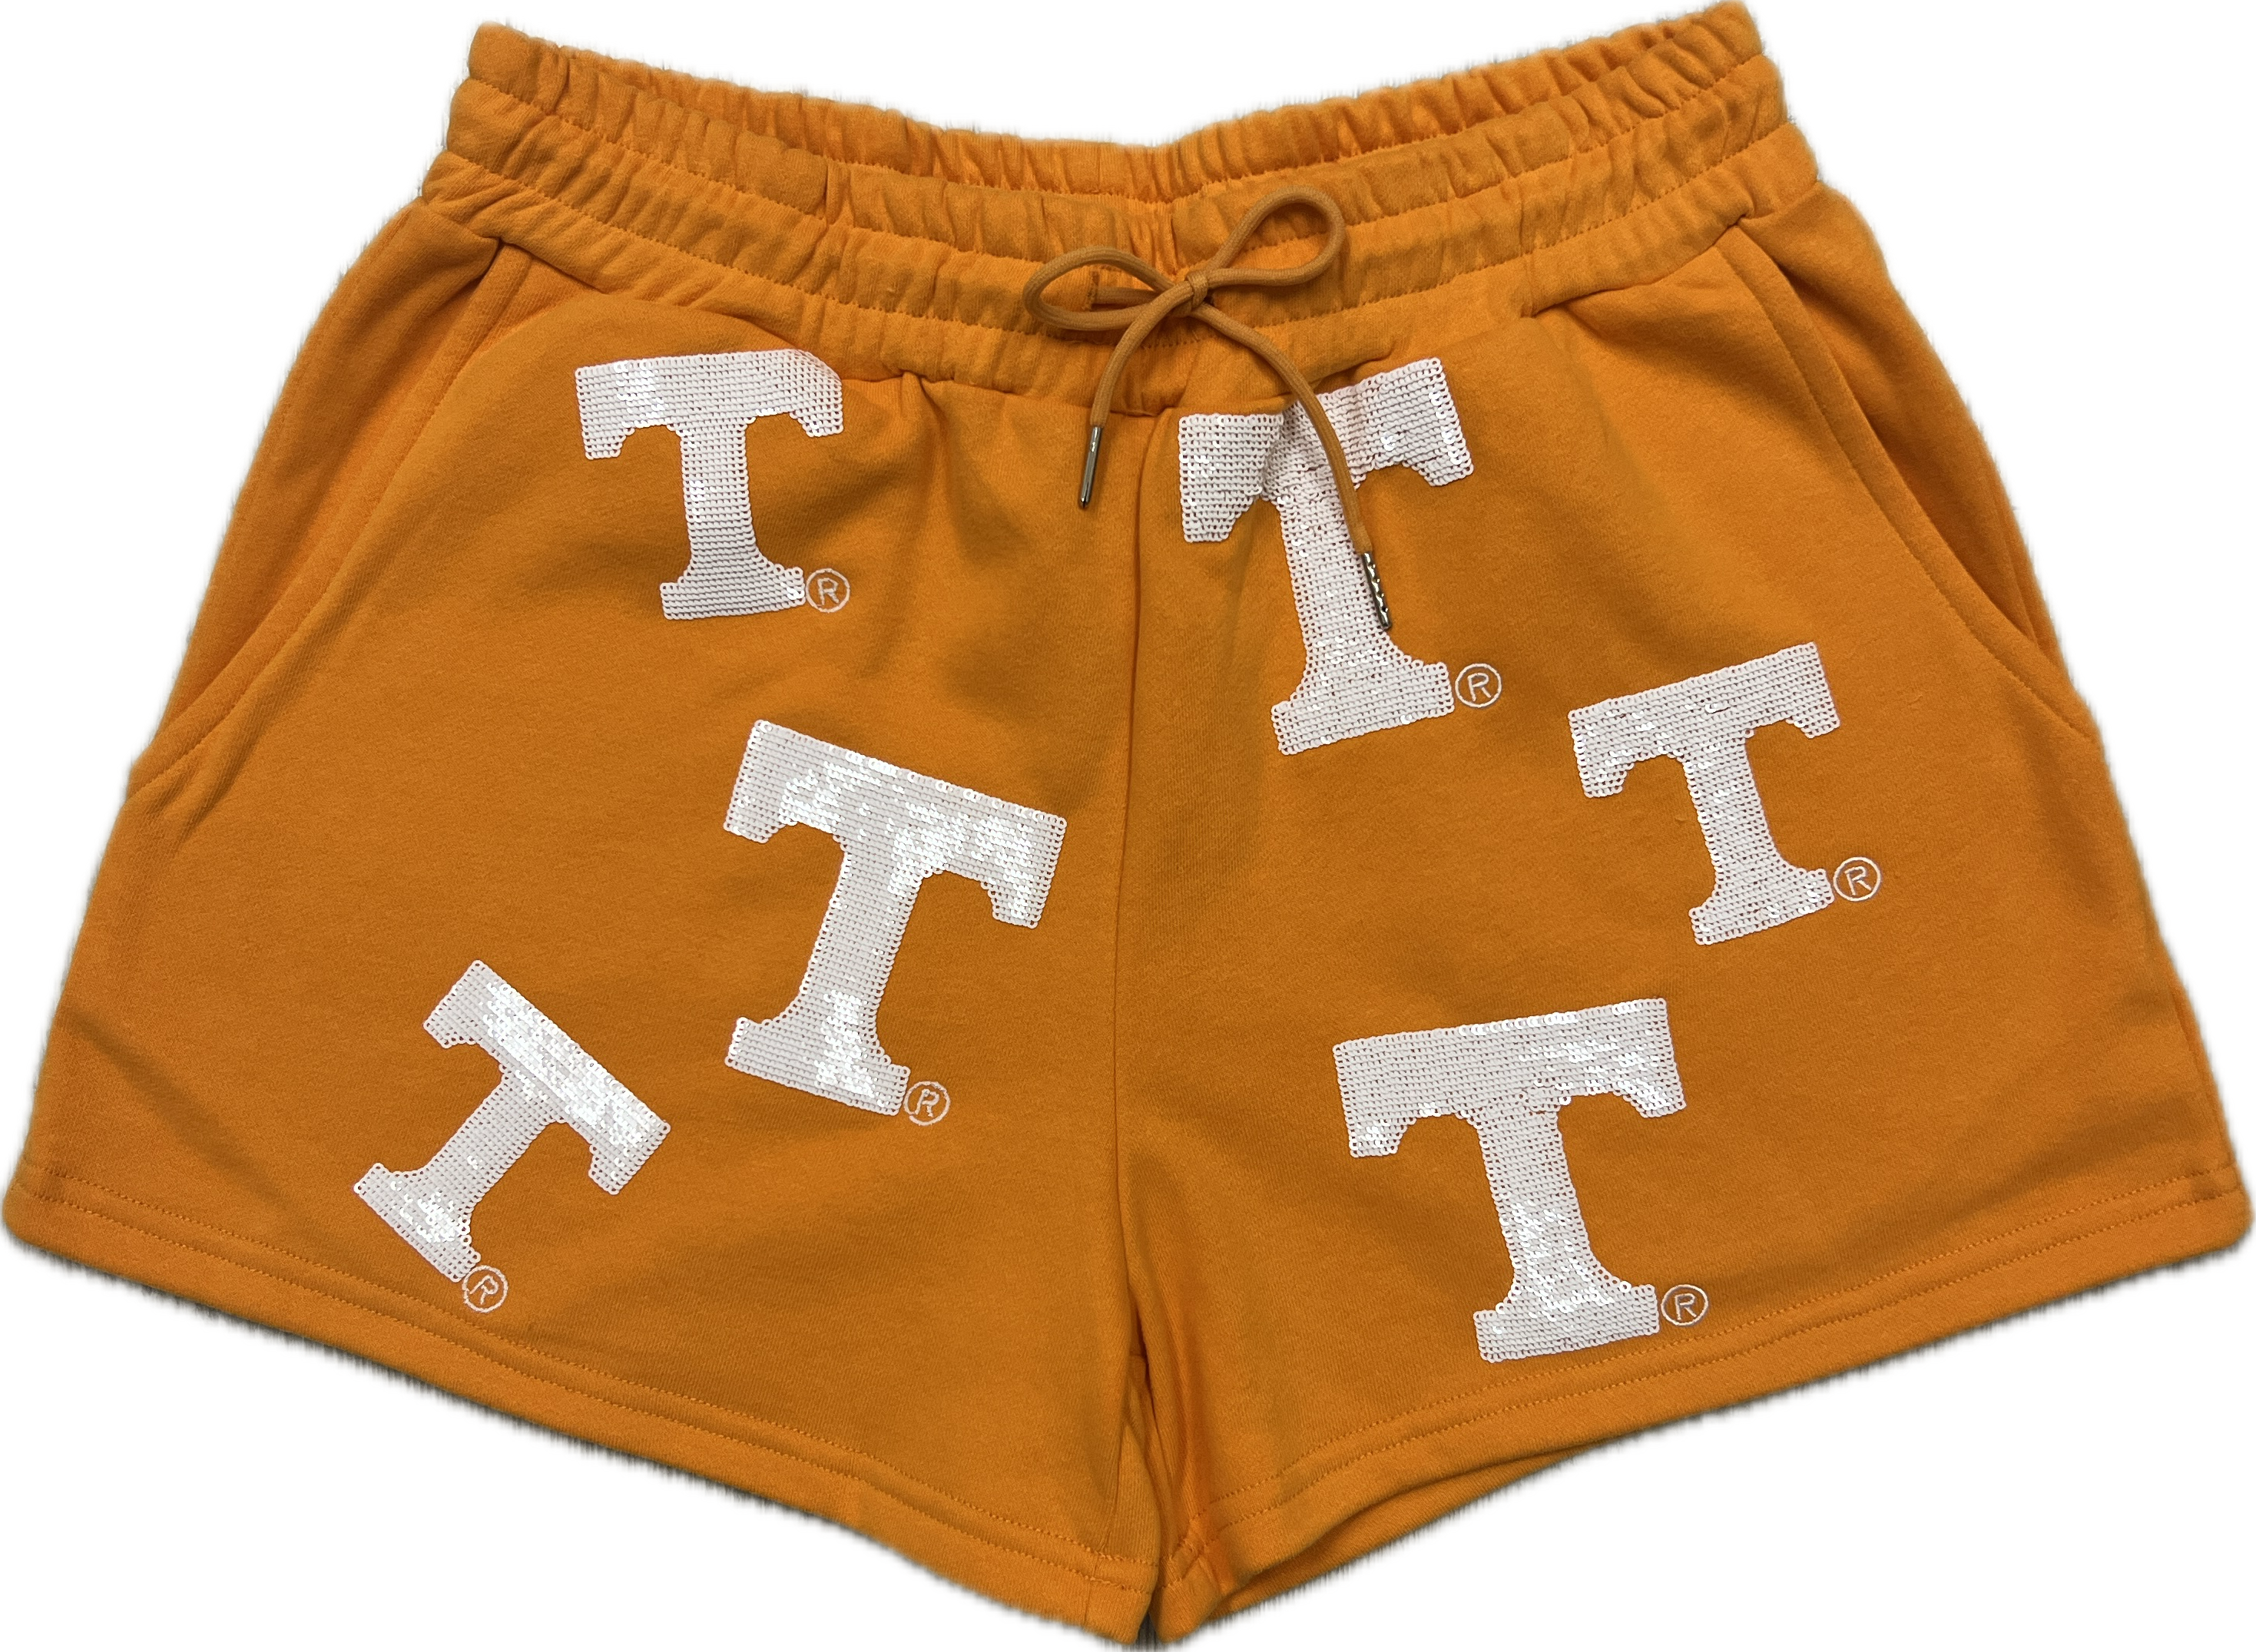 POWER T TAKEOVER SHORTS